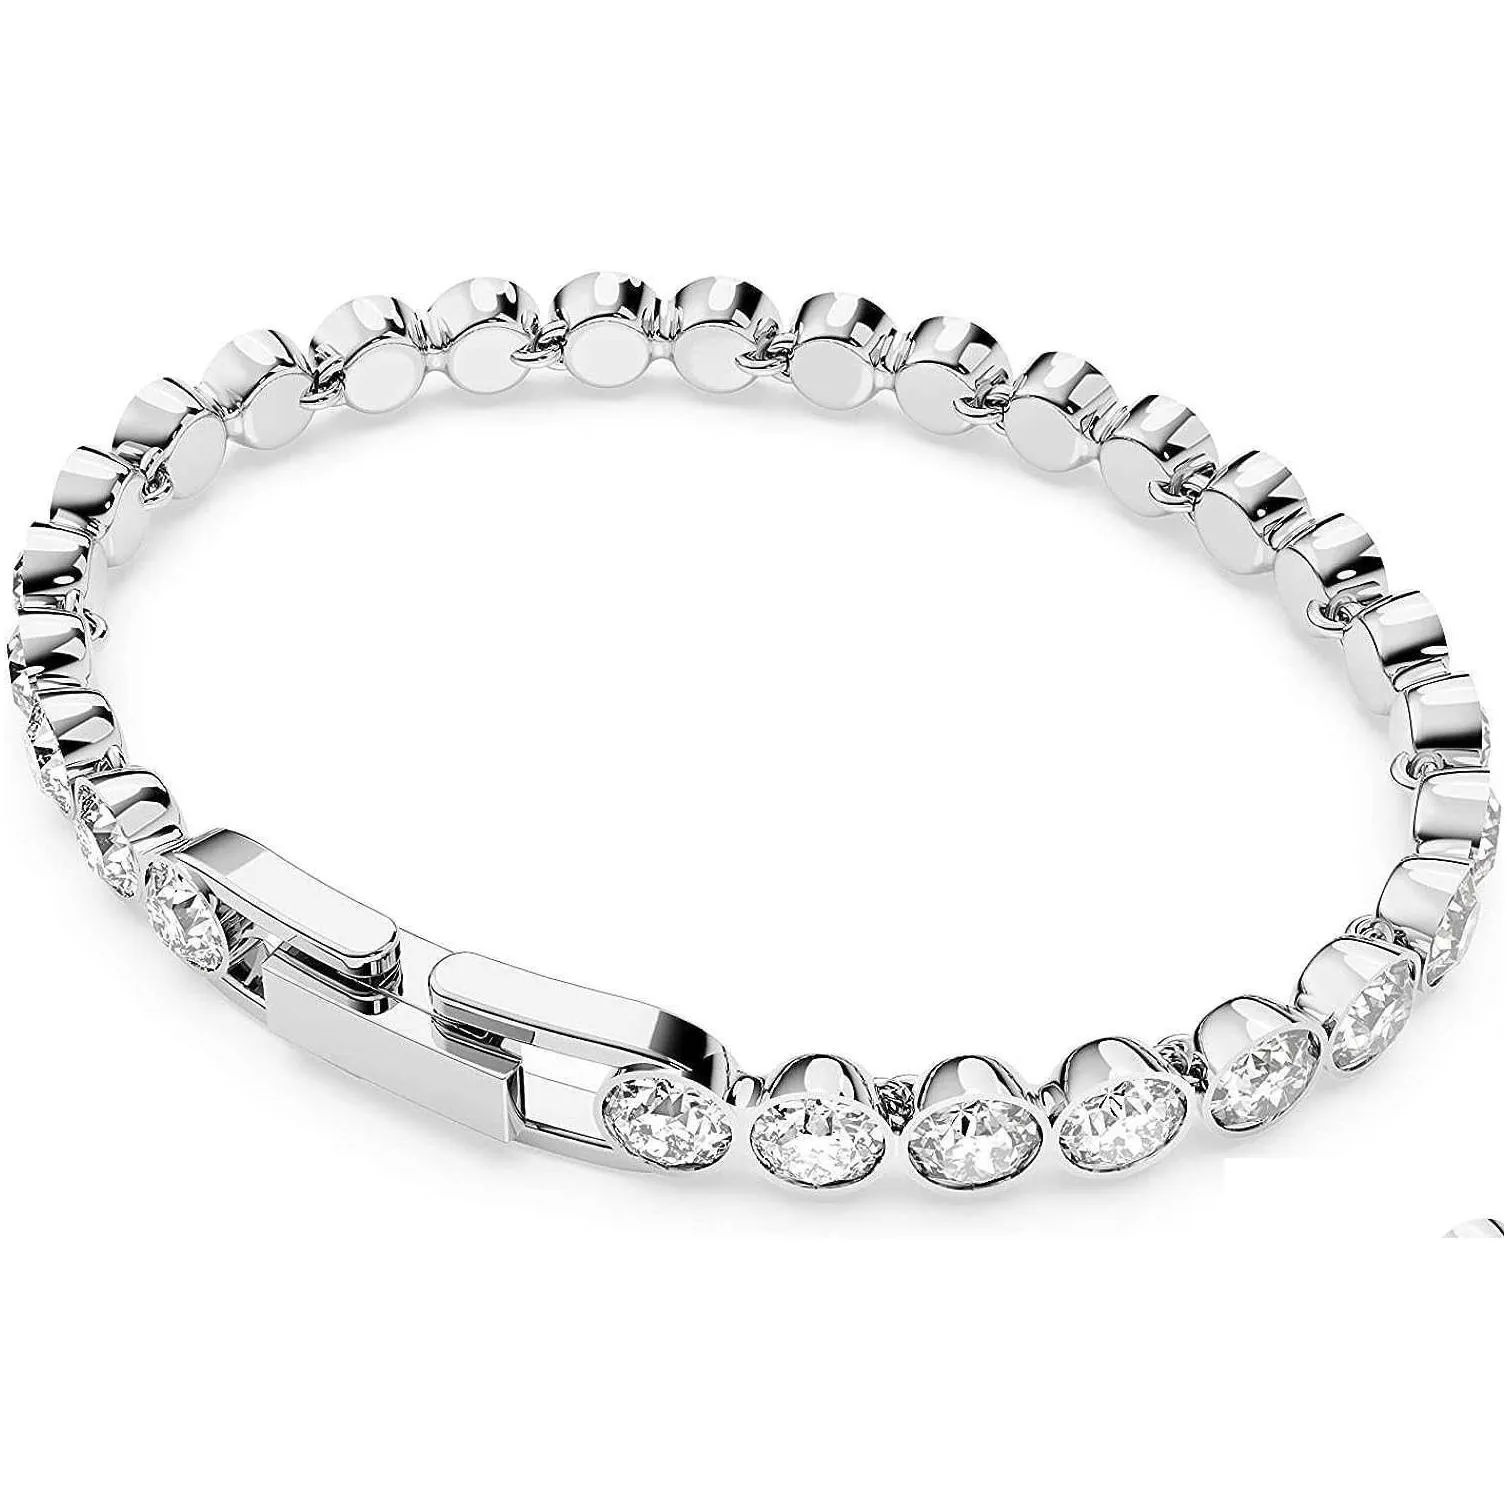 Swarovski Tennis Bracelet and Earring Jewelry Collection Rhodium Finish Clear Crystals